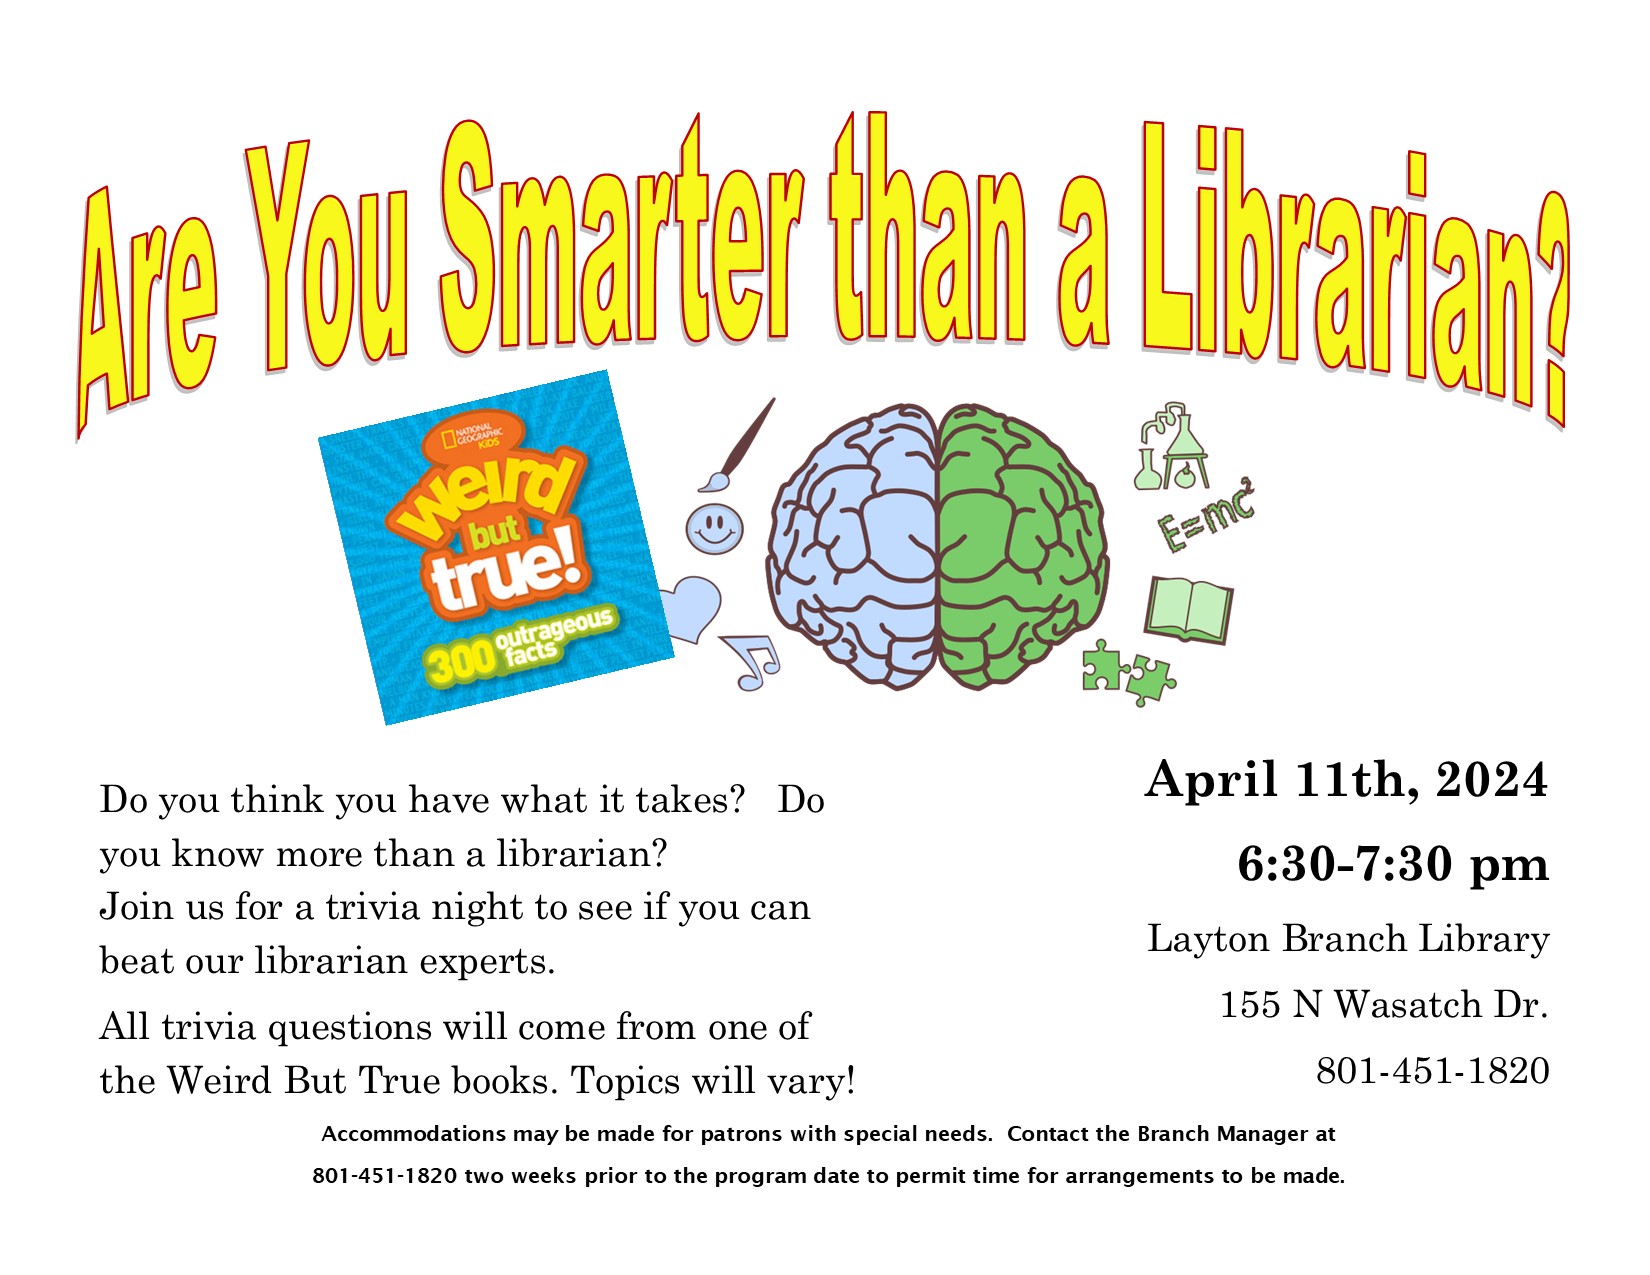 Are You Smarter than a Librarian Trivia night will be April 11, 6:30-7:30pm